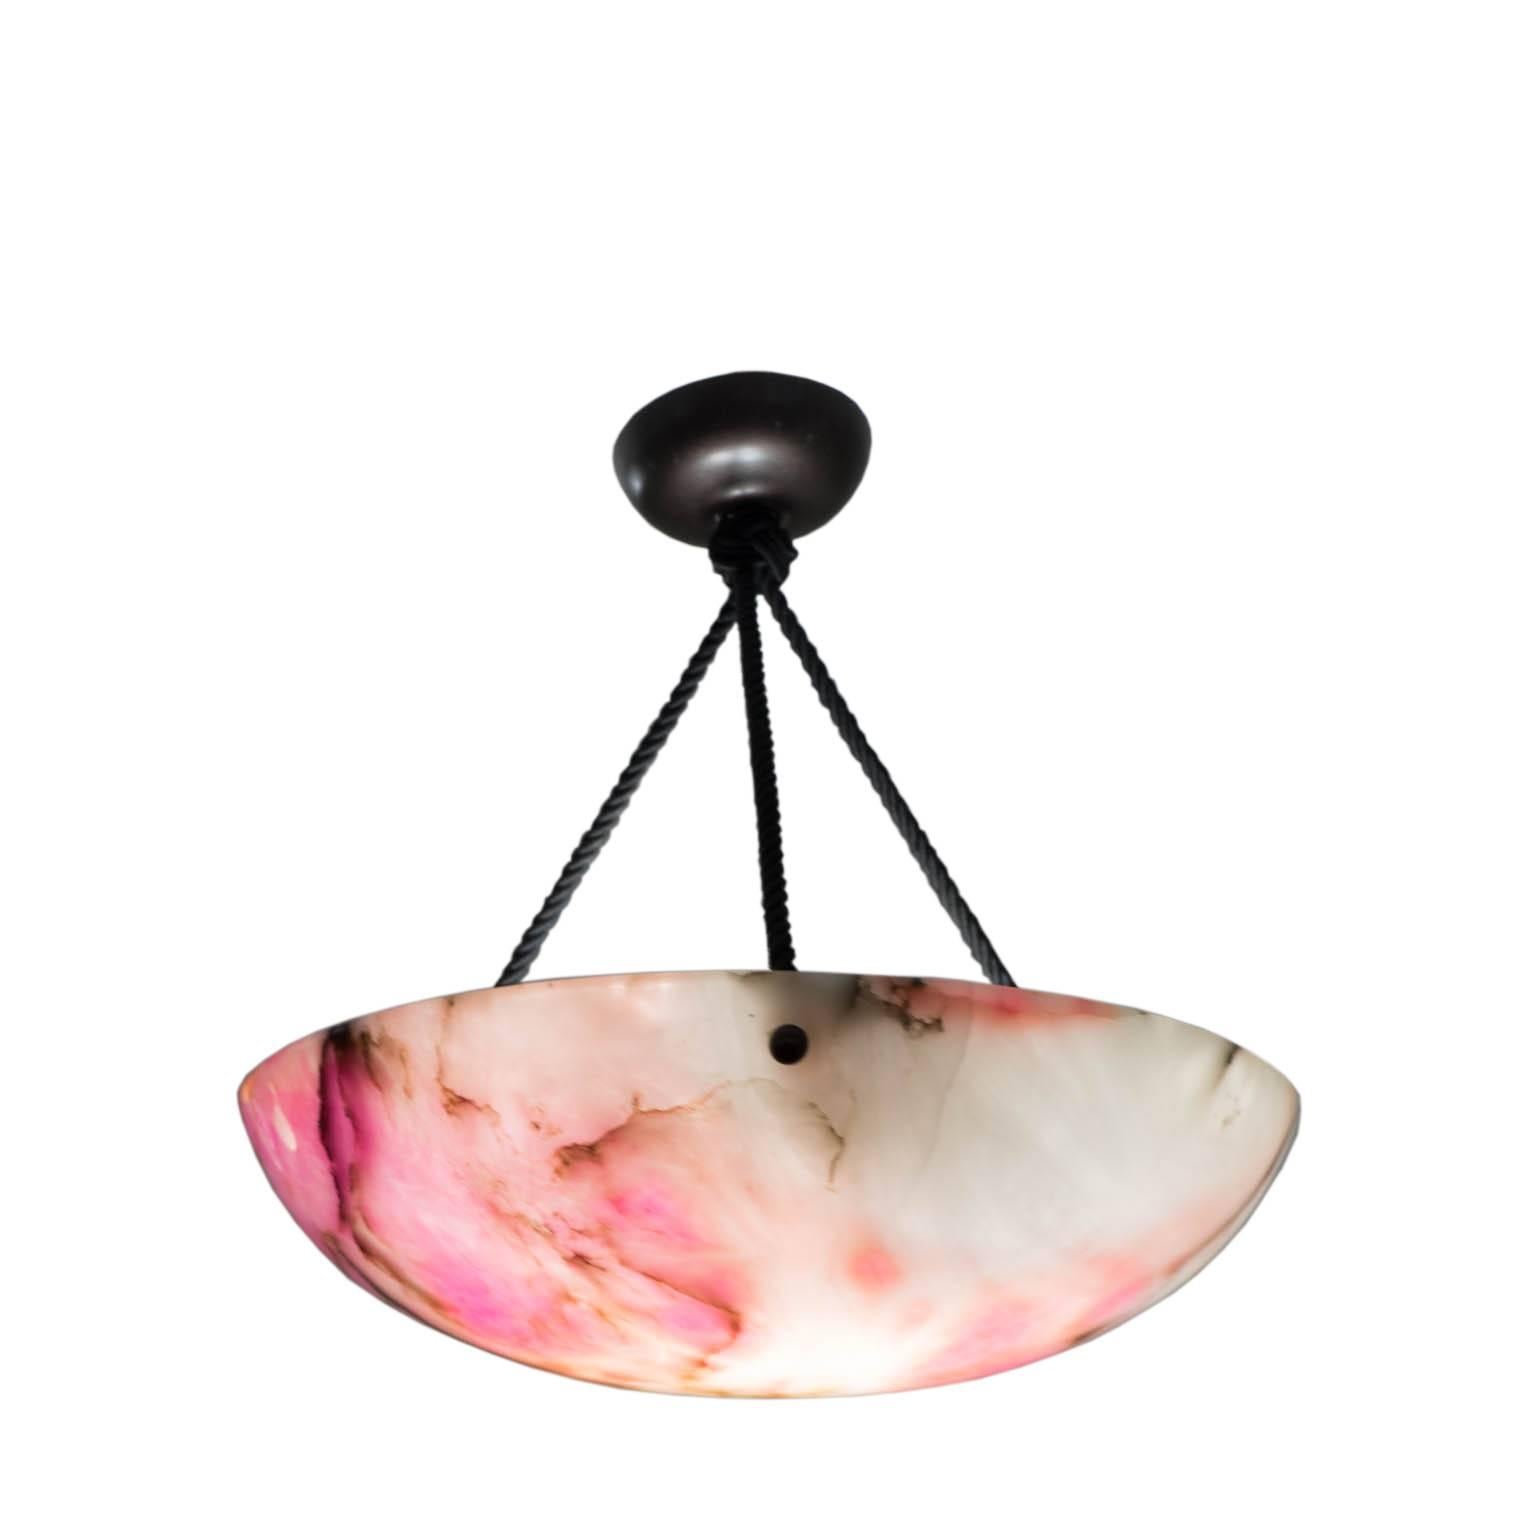 A traditional, period treatment of submersion in beet juice resulted in this stunning transformation of a beautifully veined fixture of white alabaster to Hot Pink! Rare examples of this 1920s technique are occasionally found, as are baby blue and